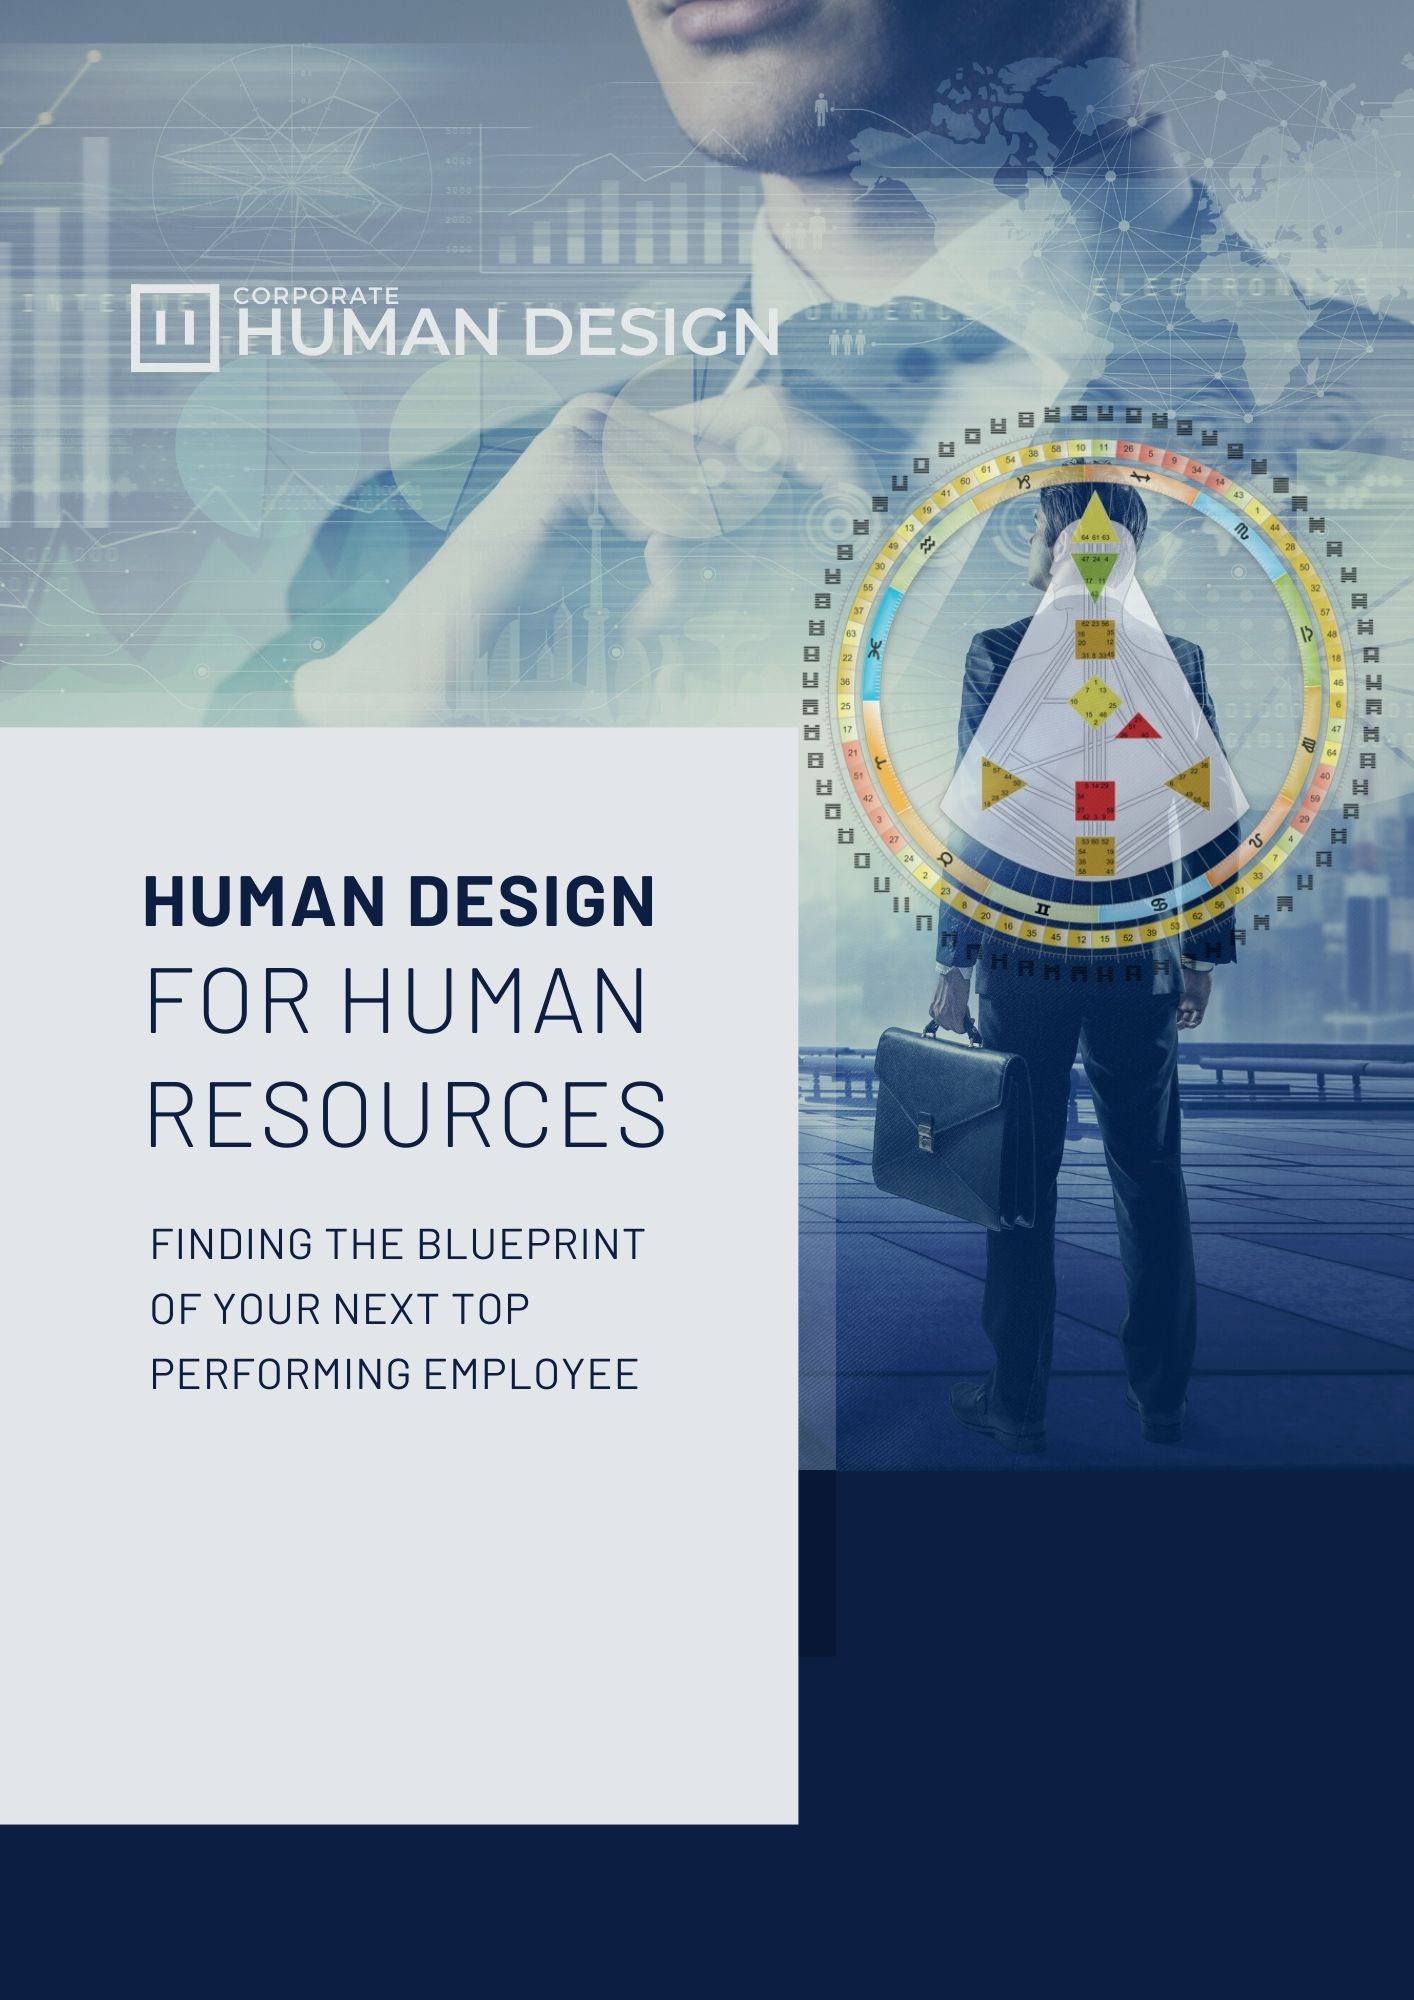 Human Design for Corporate